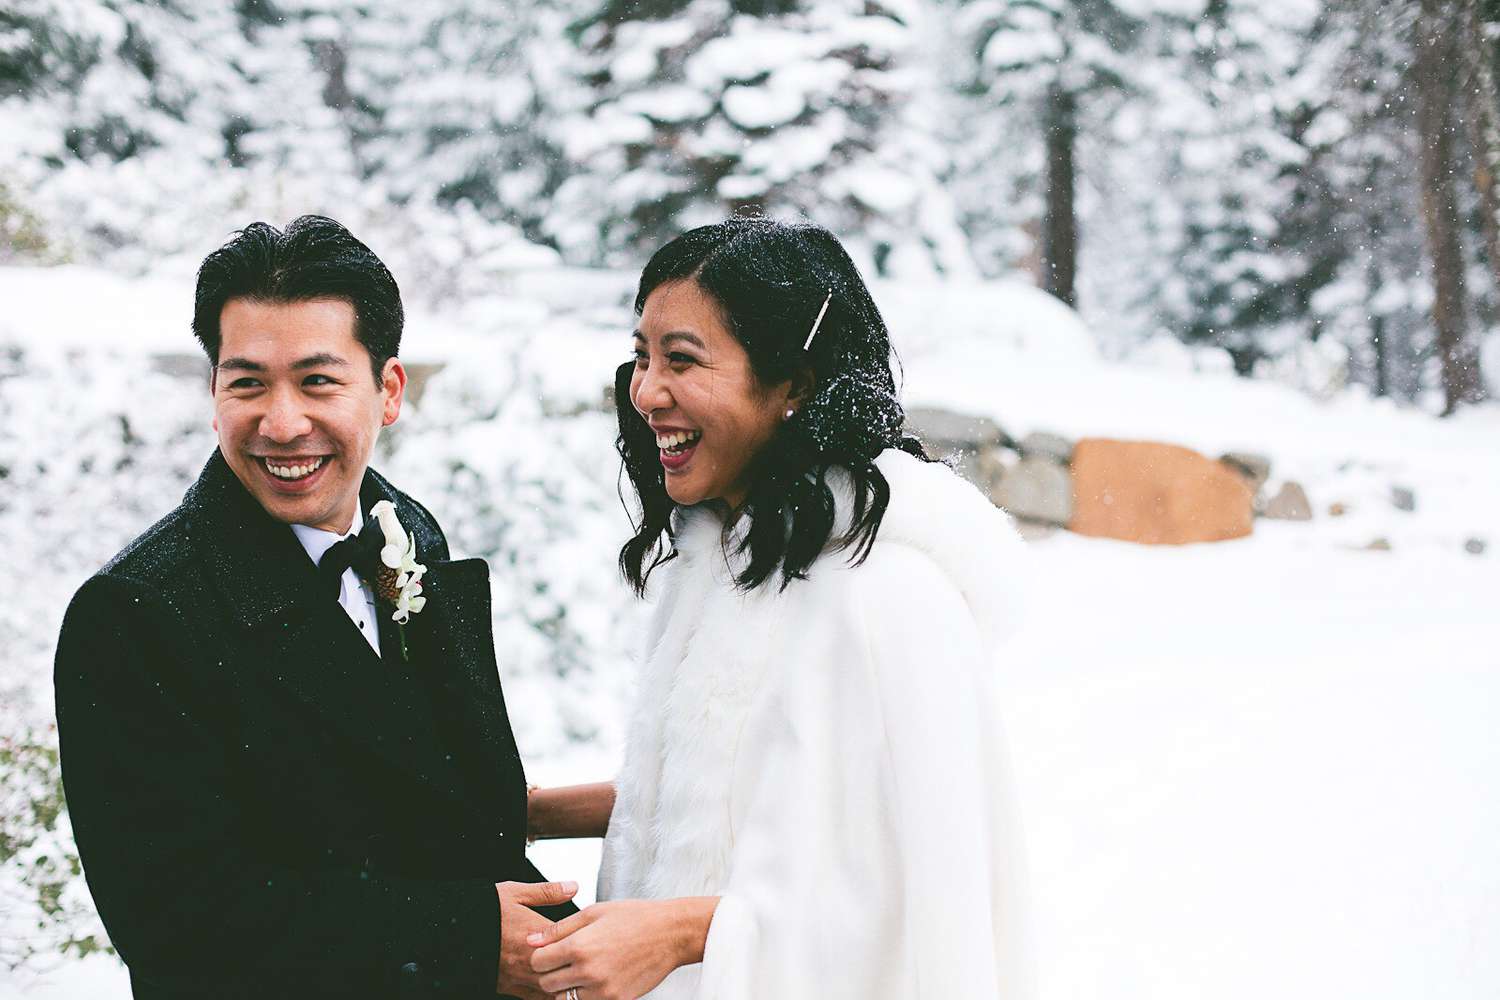 Snowy Wedding Photo with Bride and Groom